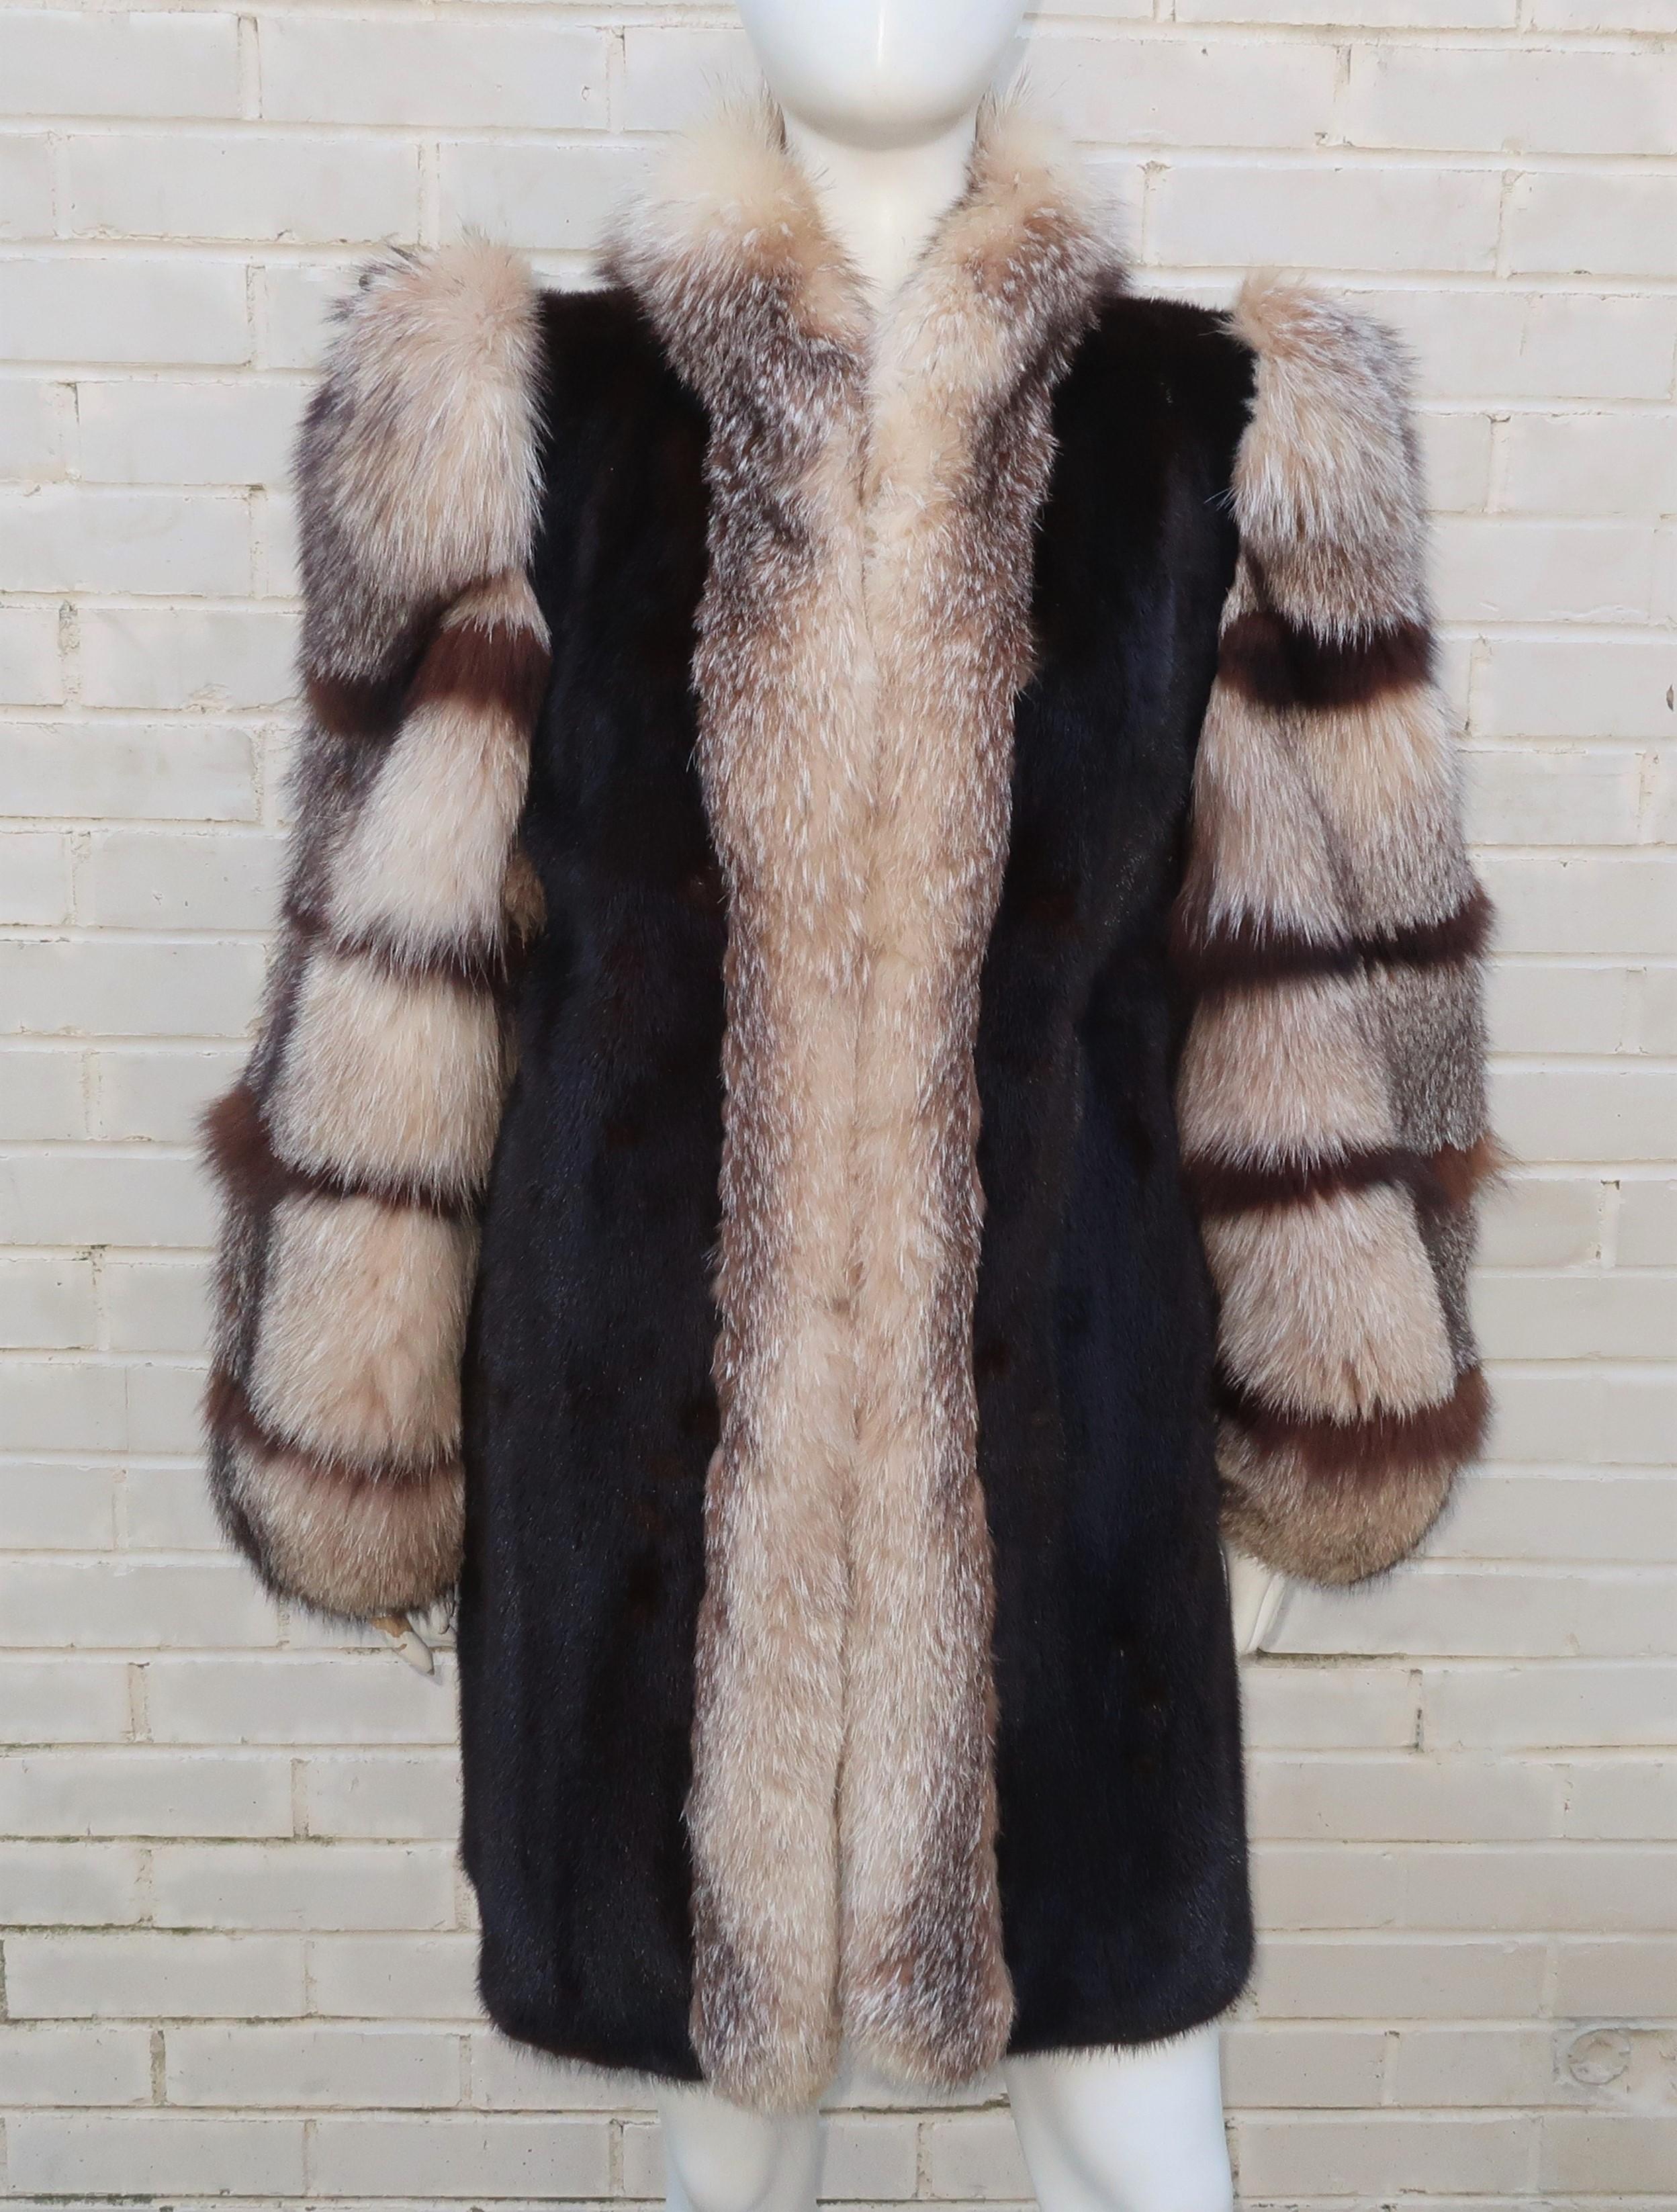 Wrap yourself in luxury with a dramatic 1980's style.  This fur stroller length coat is designed with lush Saga brand dark brown mink accented with fox fur trim and puff sleeves.  The coat hooks down the front with hidden pockets and elasticized